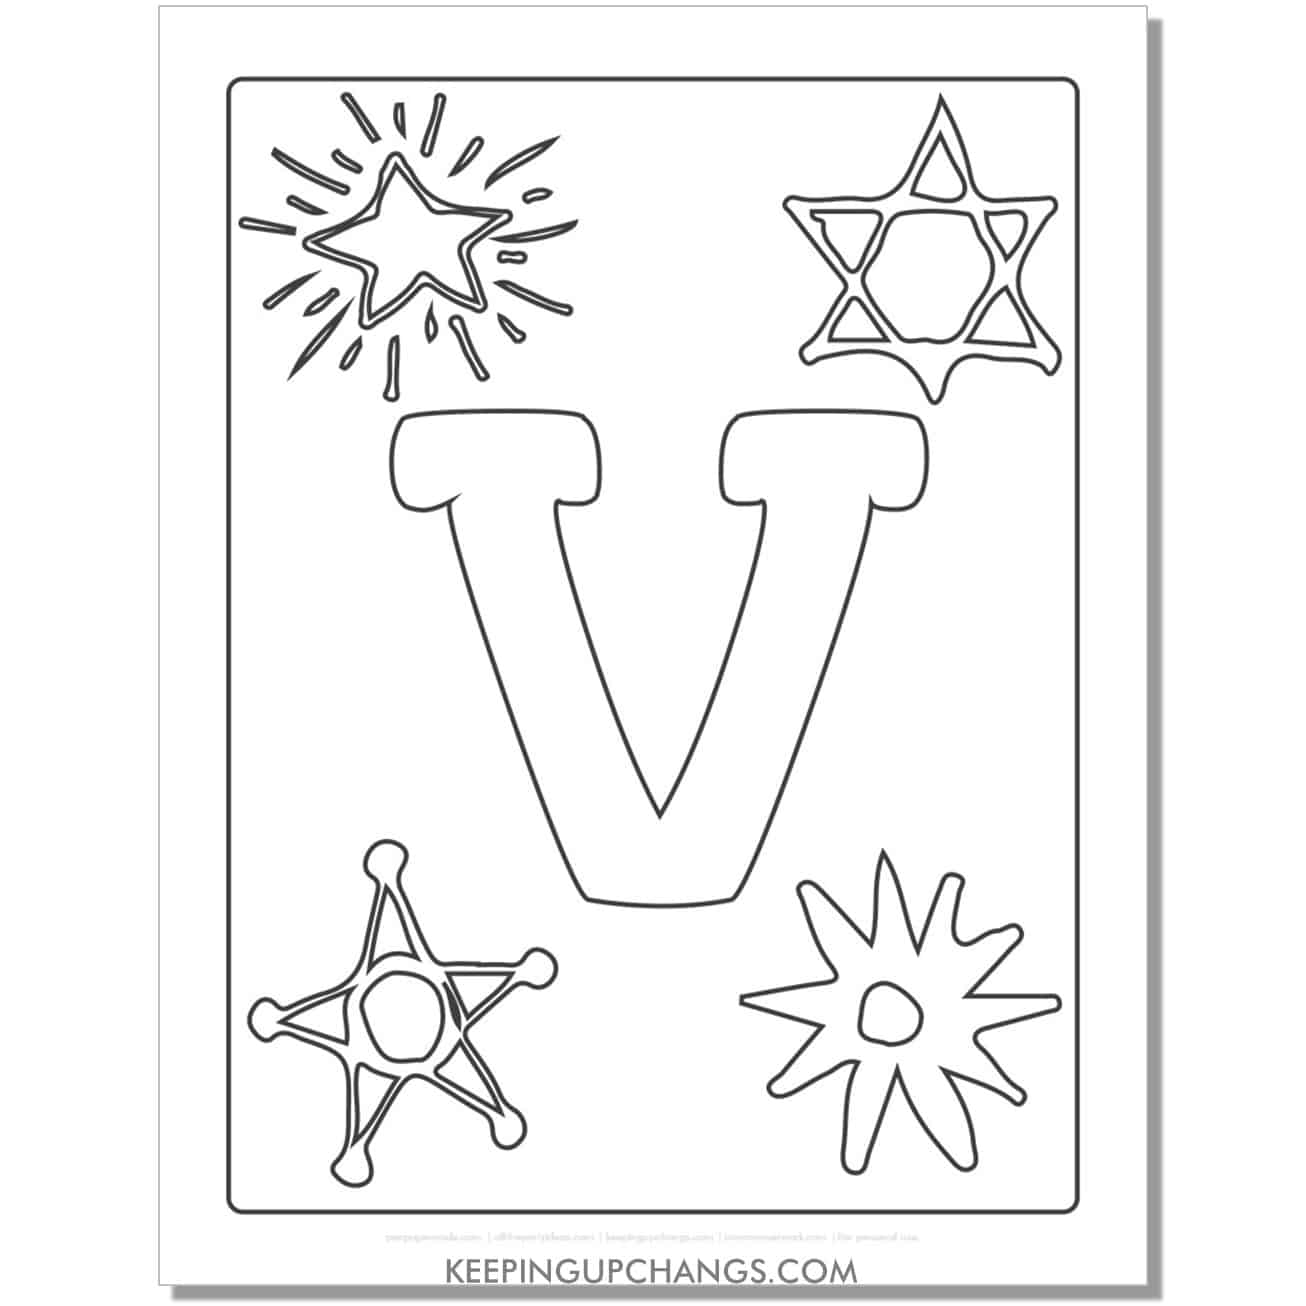 cool letter v to color with stars, space theme.